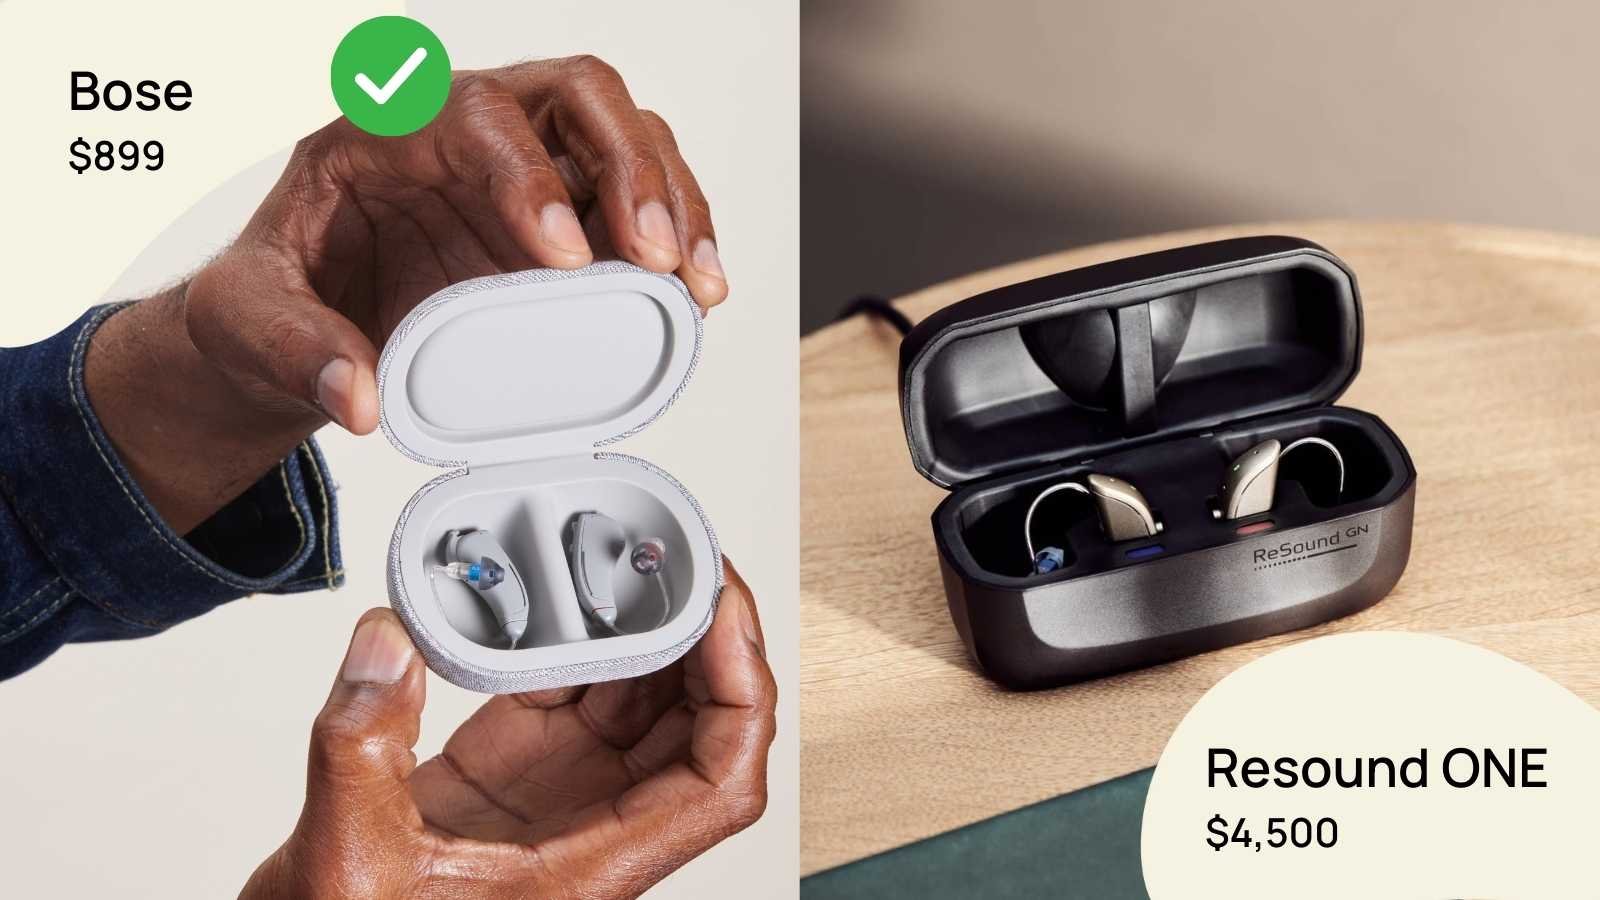 Image of Resound hearing aids and Bose hearing aids